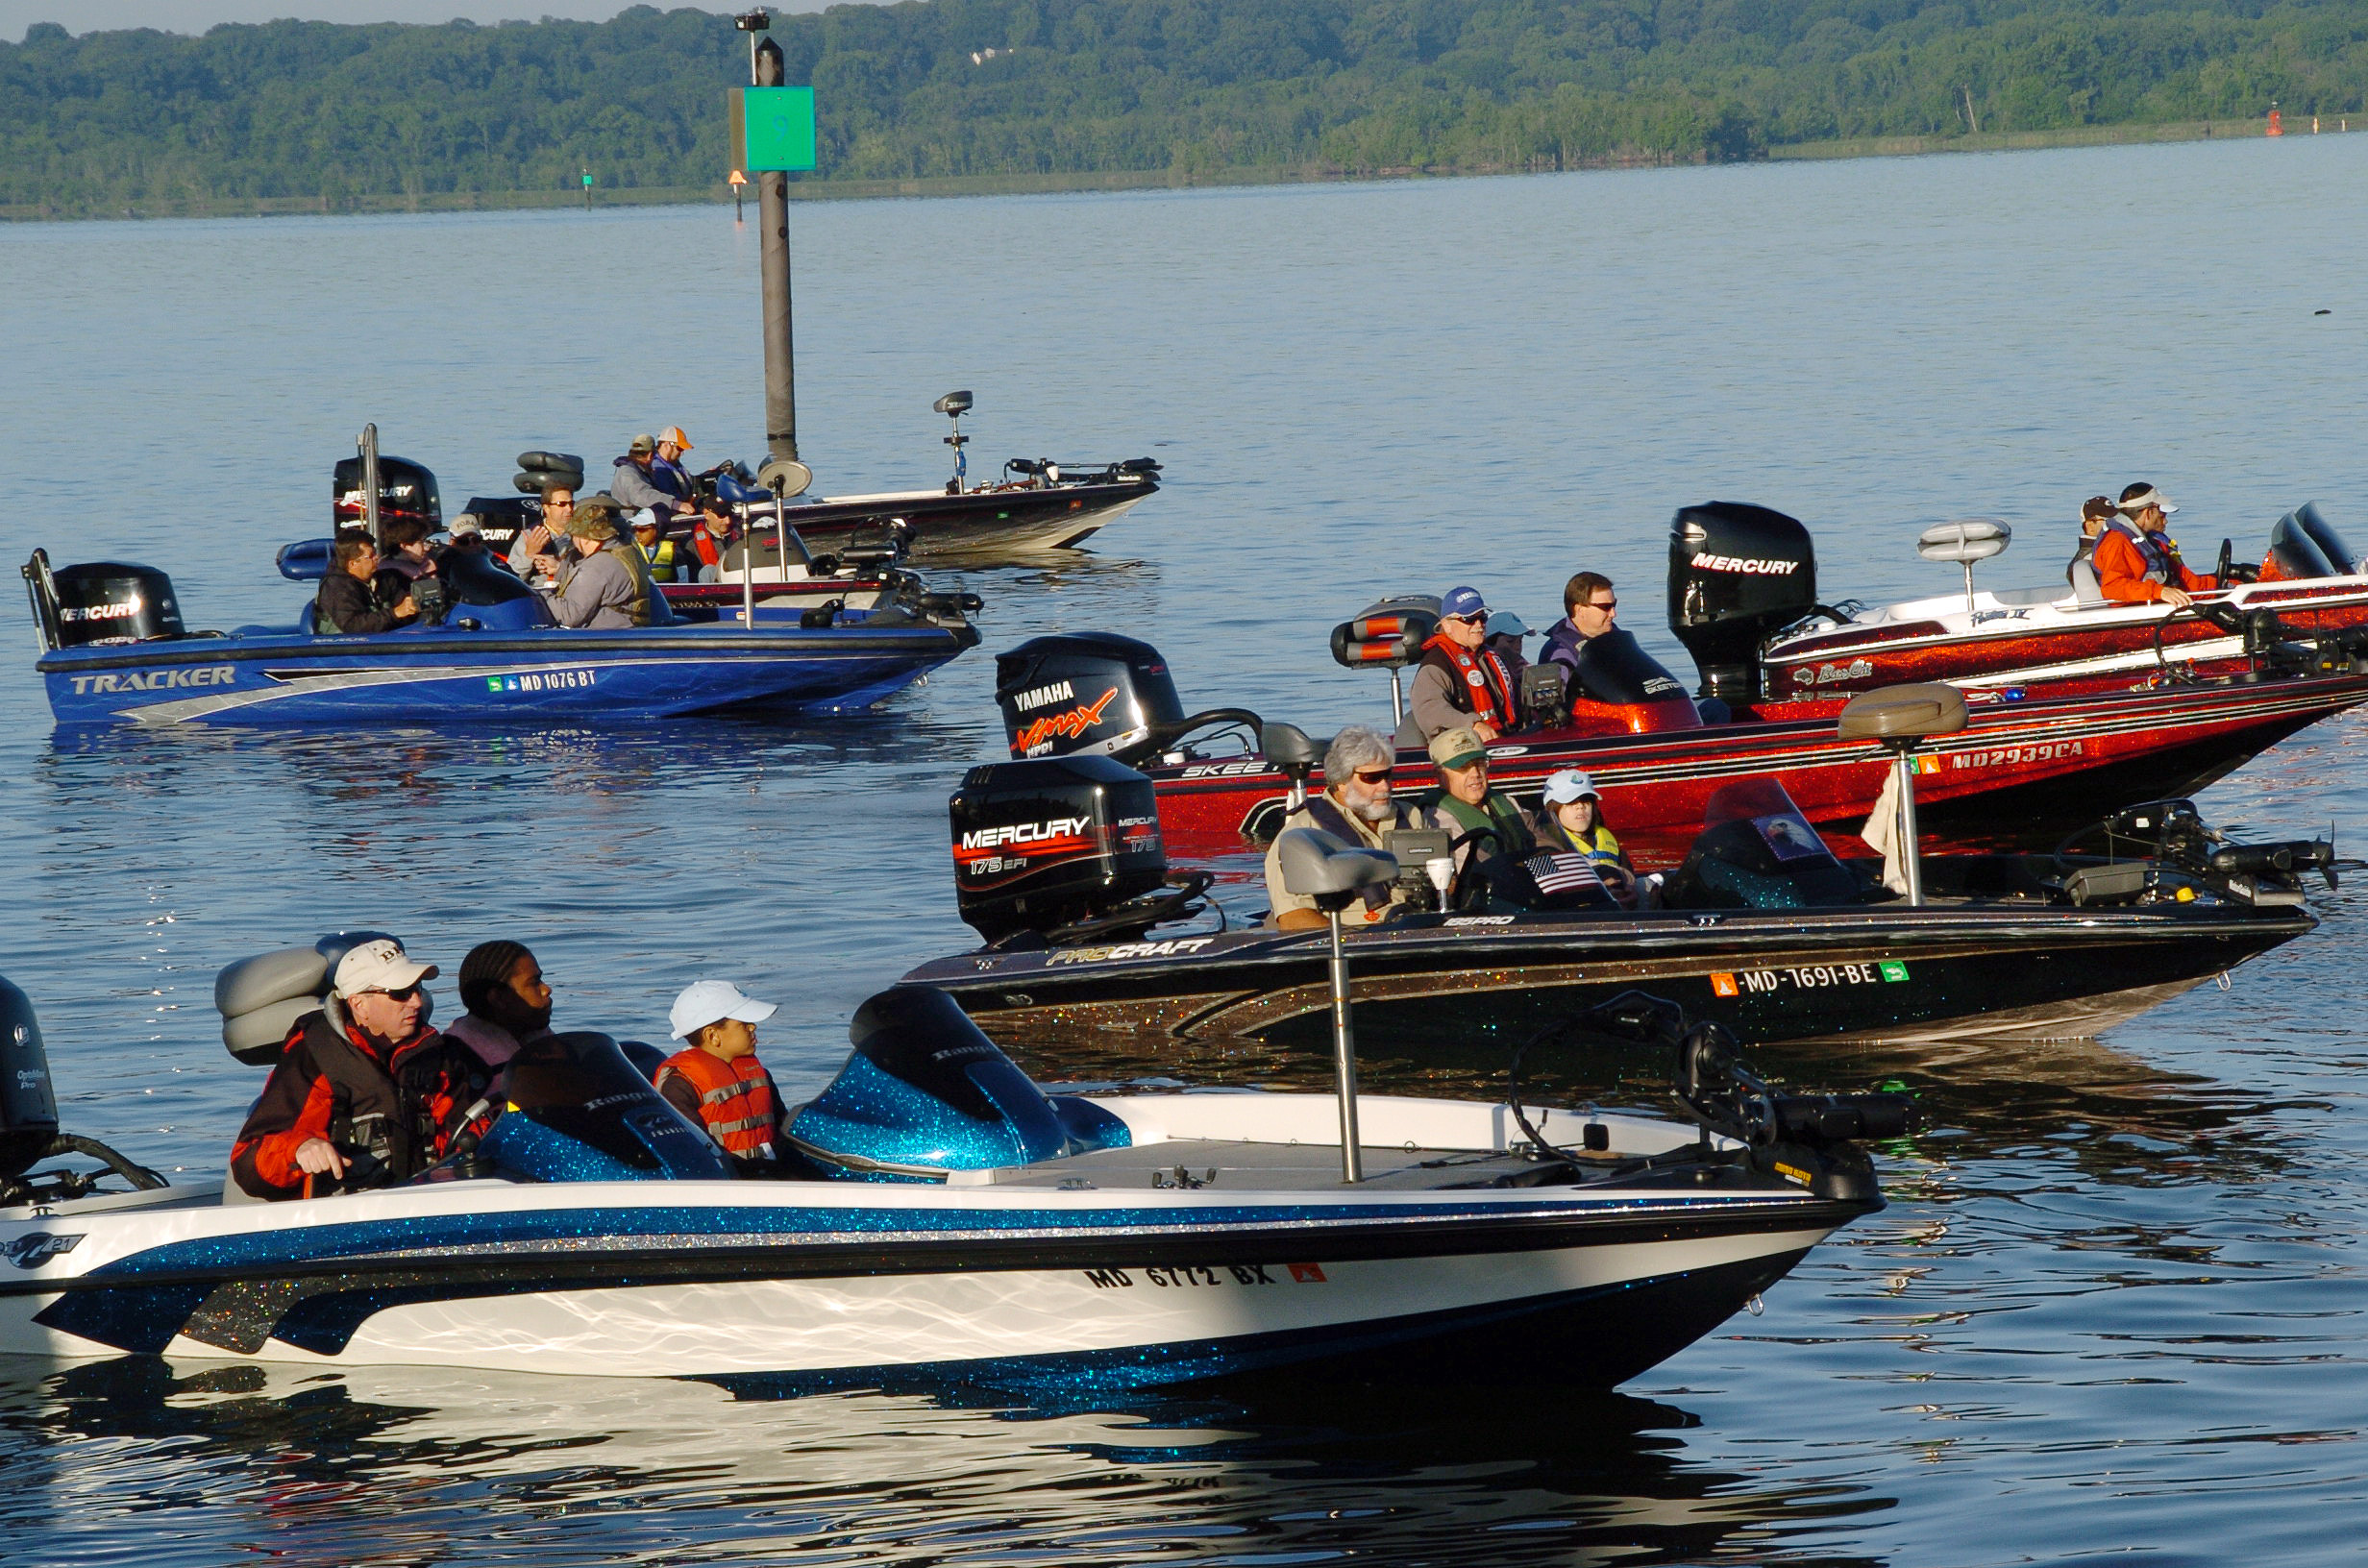 The participants of the 2009 Nation's River Bass Tournament head out on the Potomac River in speedboats.